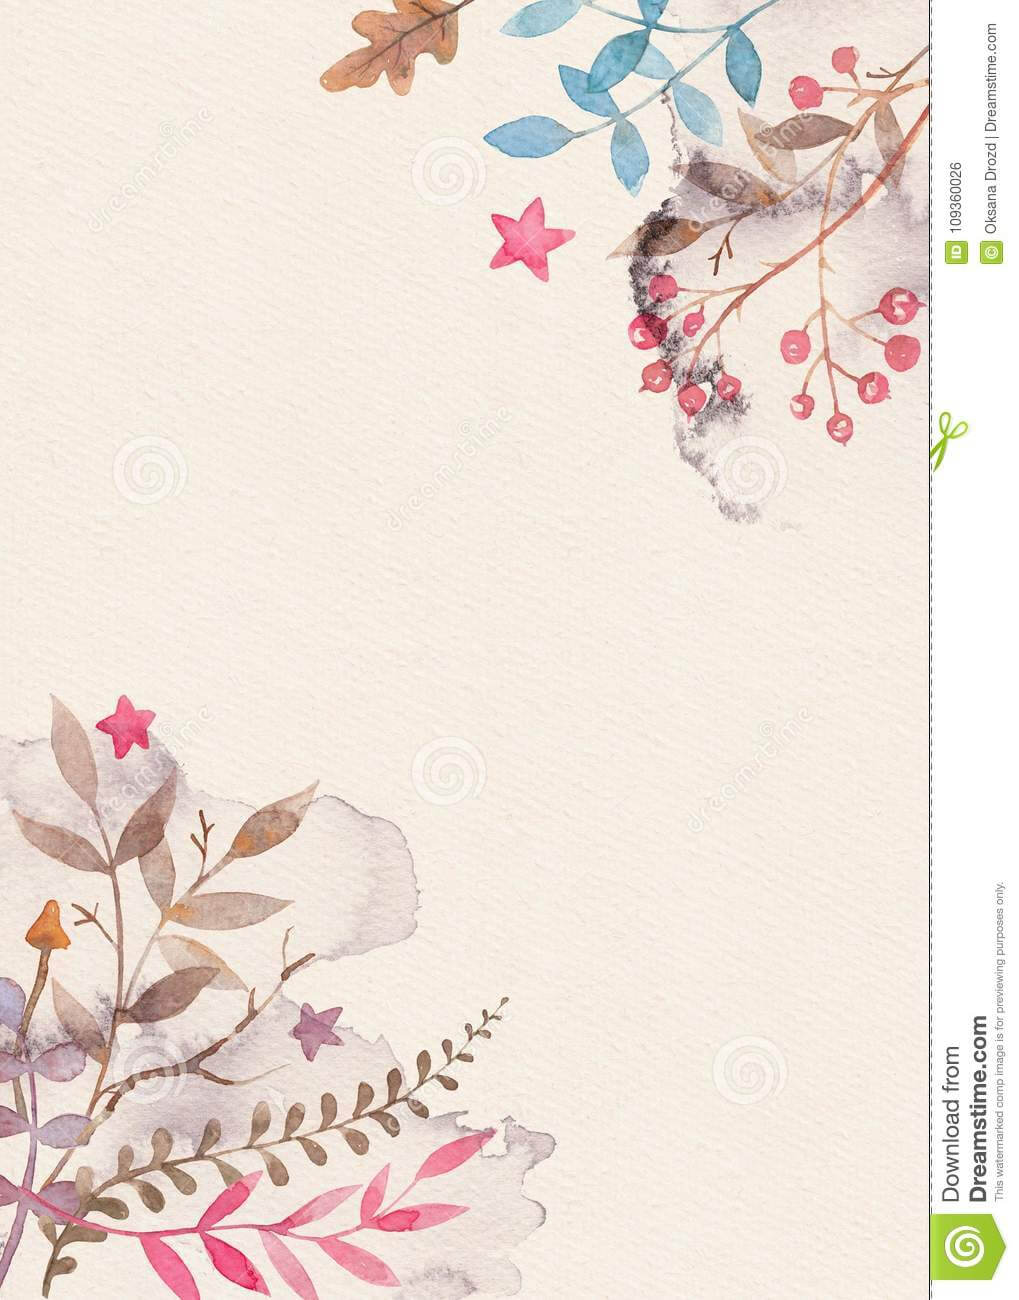 Hand Drawn Watercolor Greeting Card Template With Floral Regarding Greeting Card Layout Templates